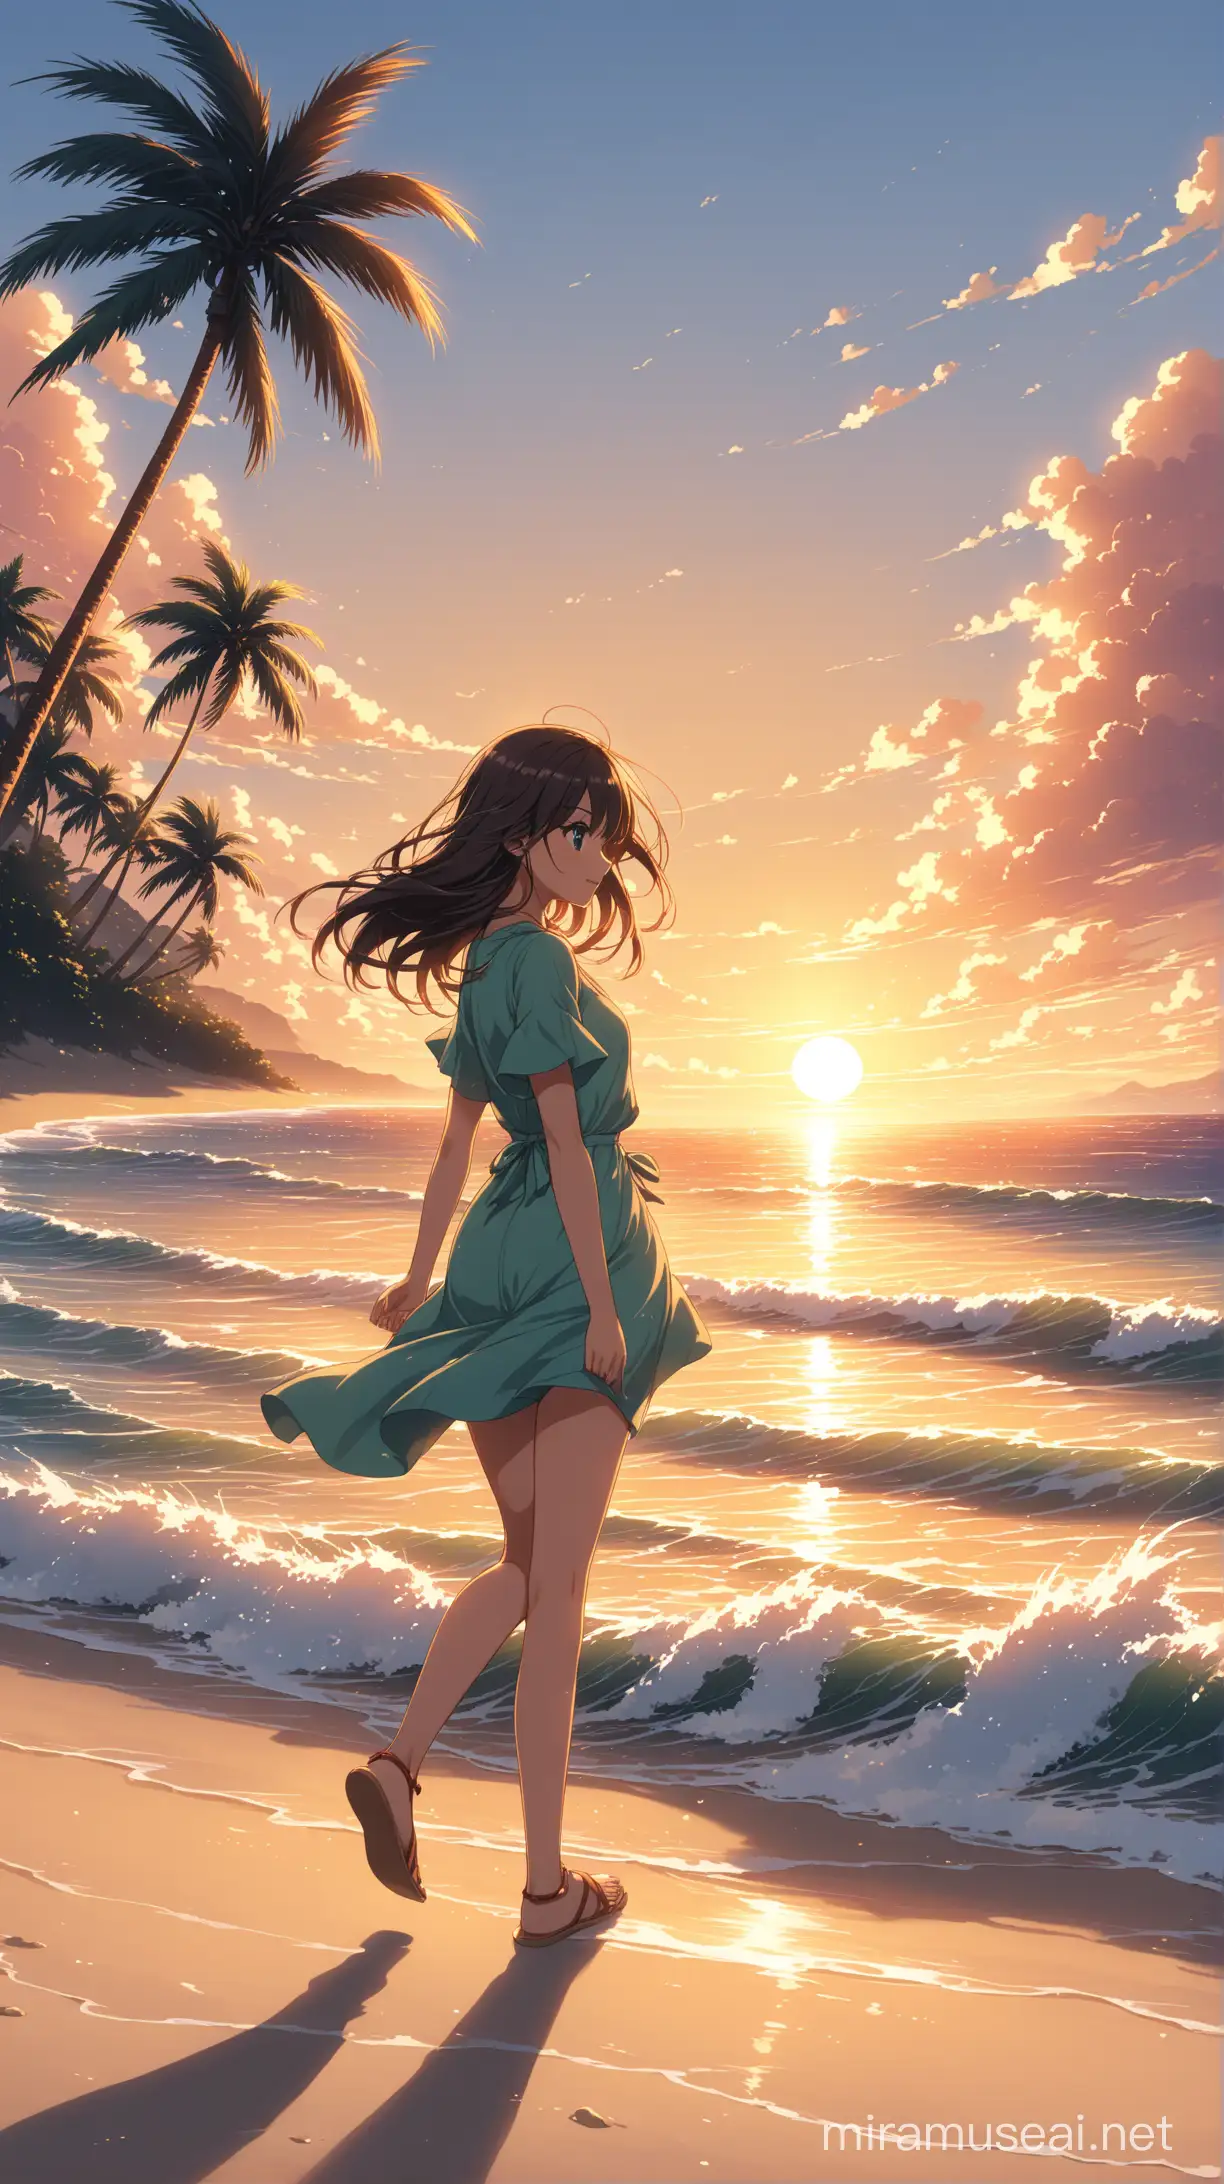 A serene beach at sunset, anime girl walking with palm trees swaying in the breeze and waves crashing gently on the shore.